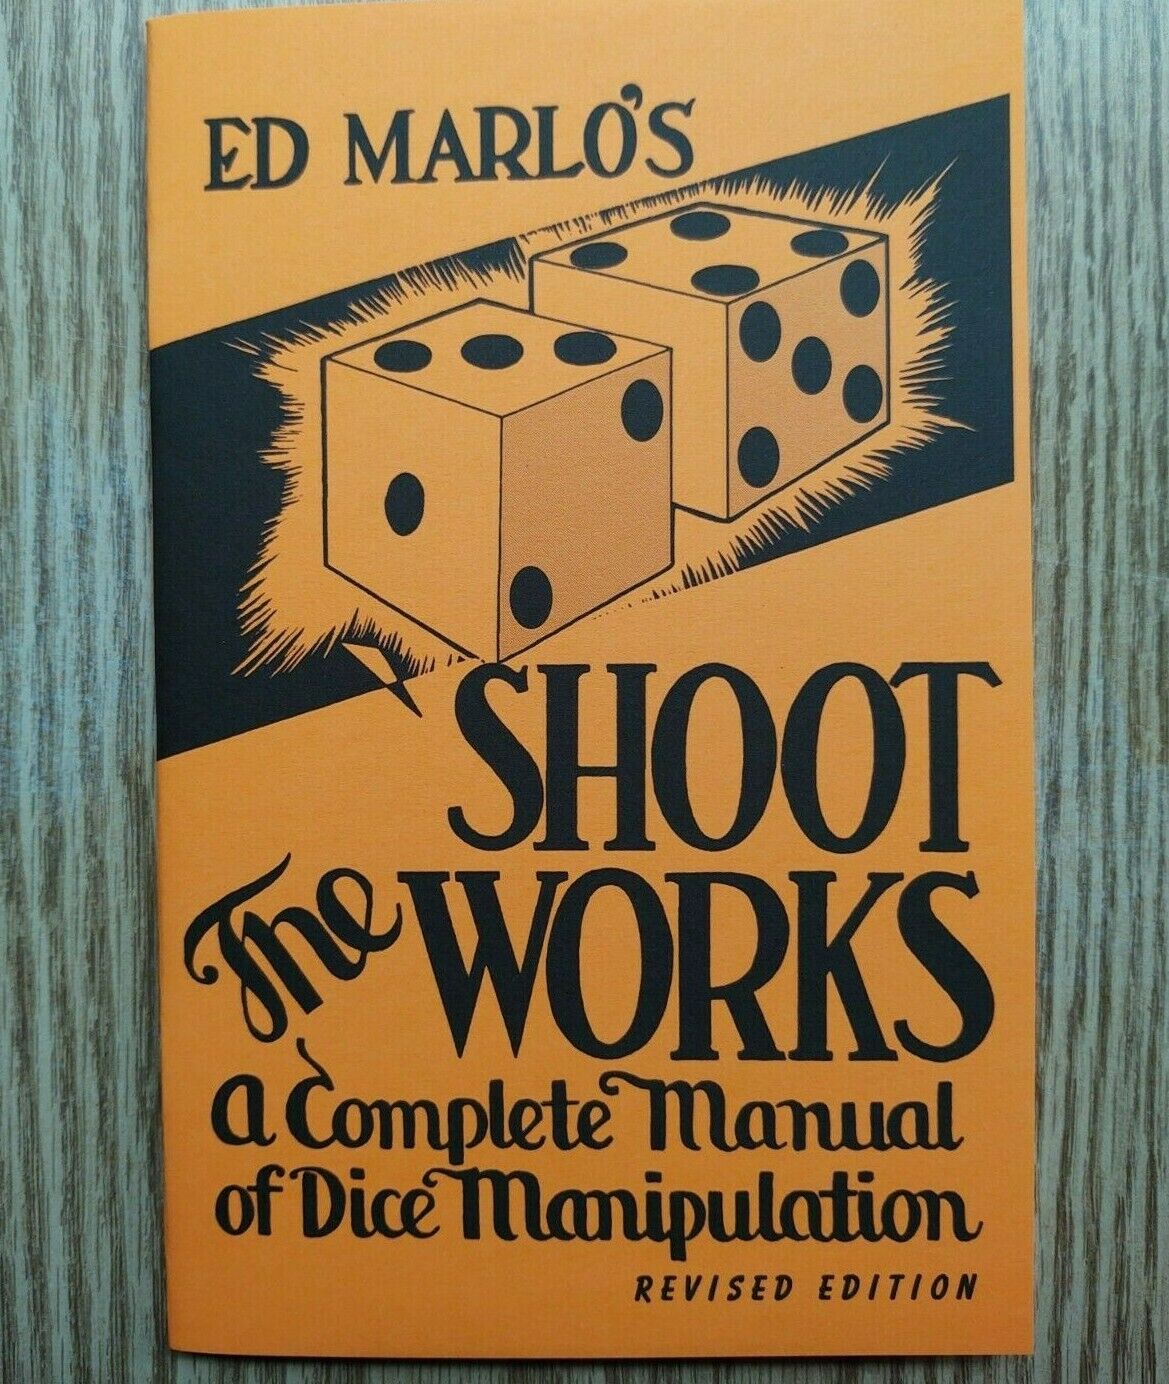 Shoot the Works by Ed Marlo (dice stacking and gambling moves with dice)